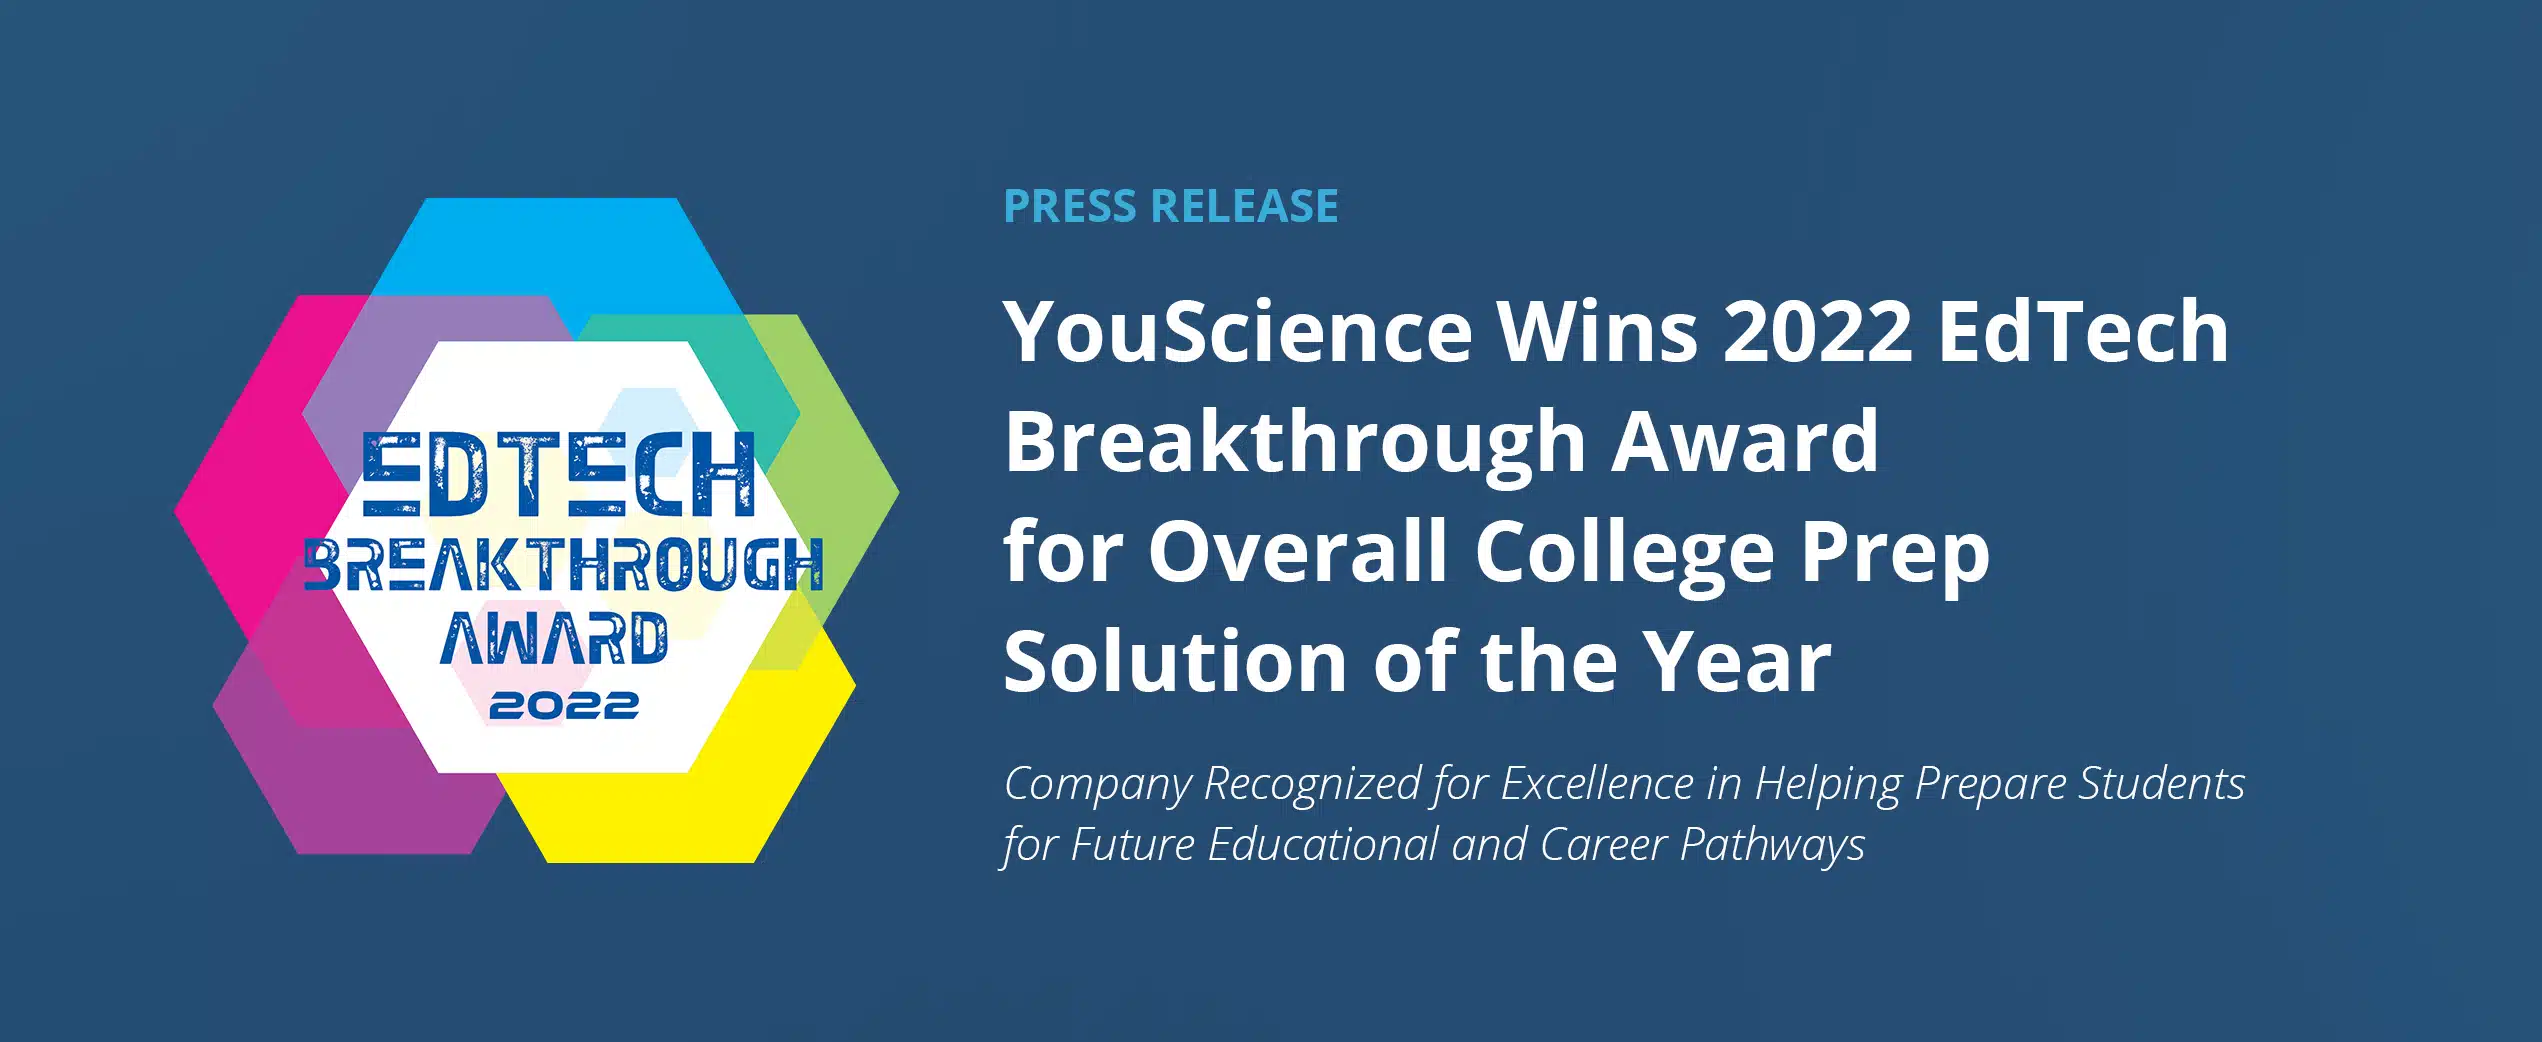 YouScience Wins 2022 EdTech Breakthrough Award for Overall College prep Solution of the Year